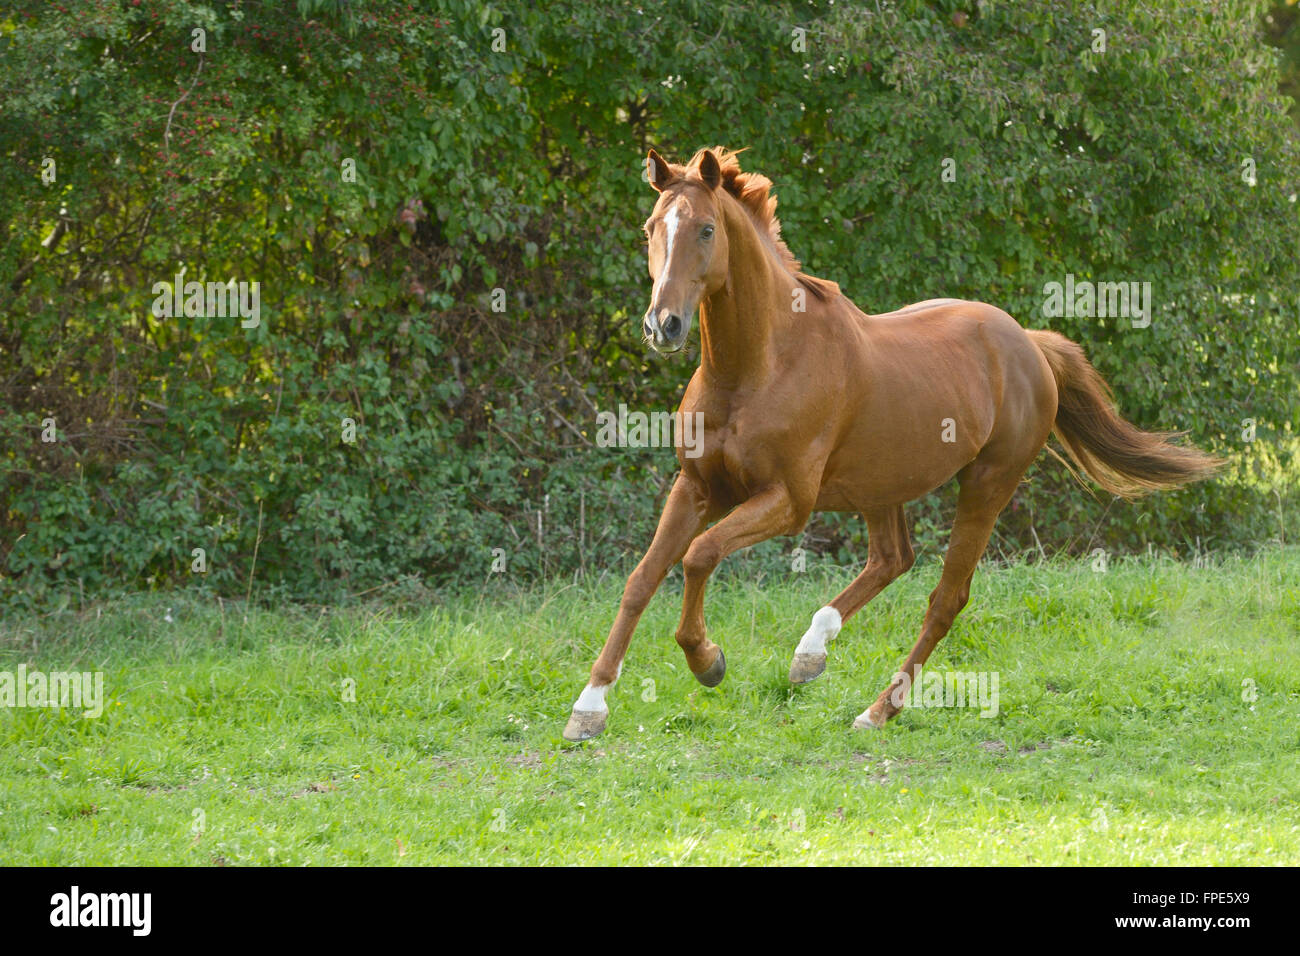 Trakehnen horse galloping in the field Stock Photo